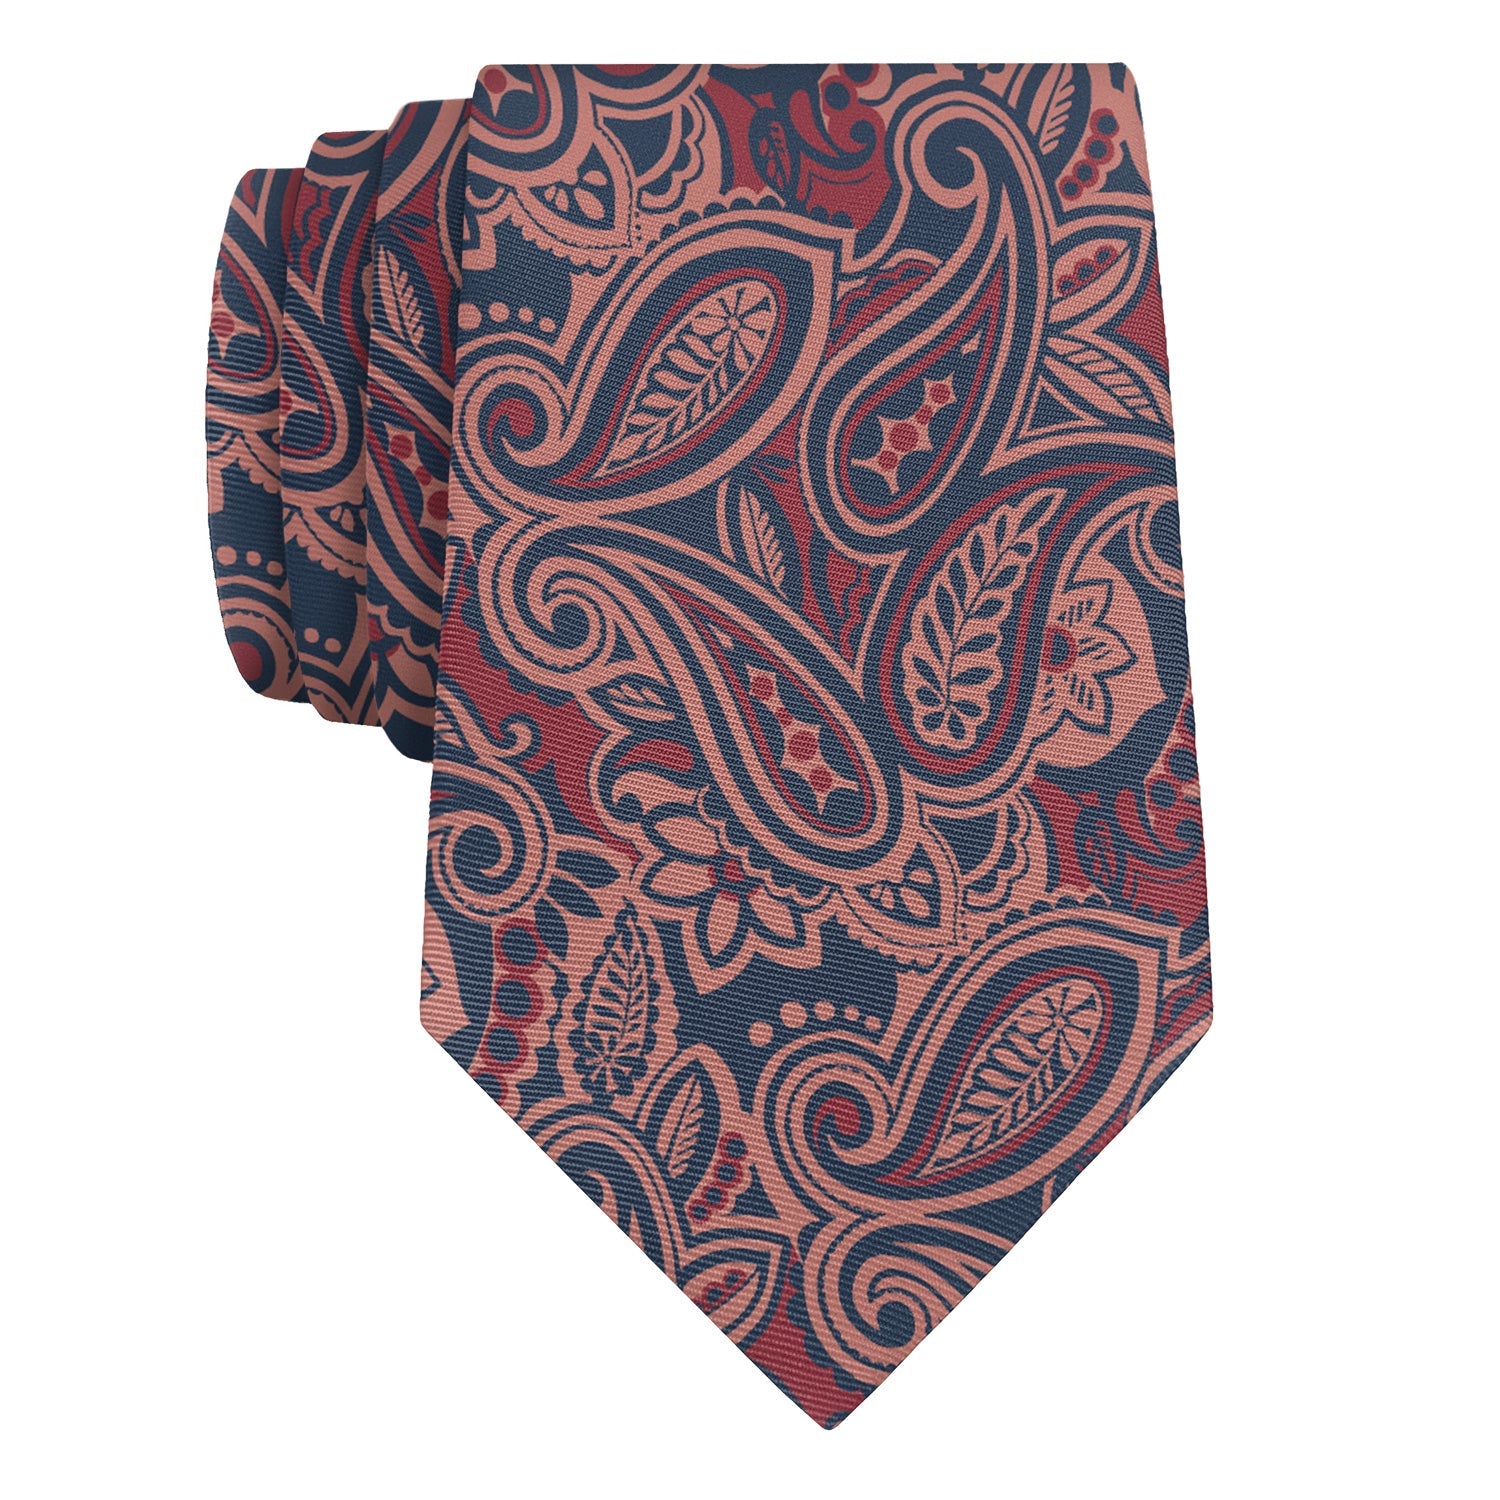 Rustica Paisley Necktie - Rolled - Knotty Tie Co.